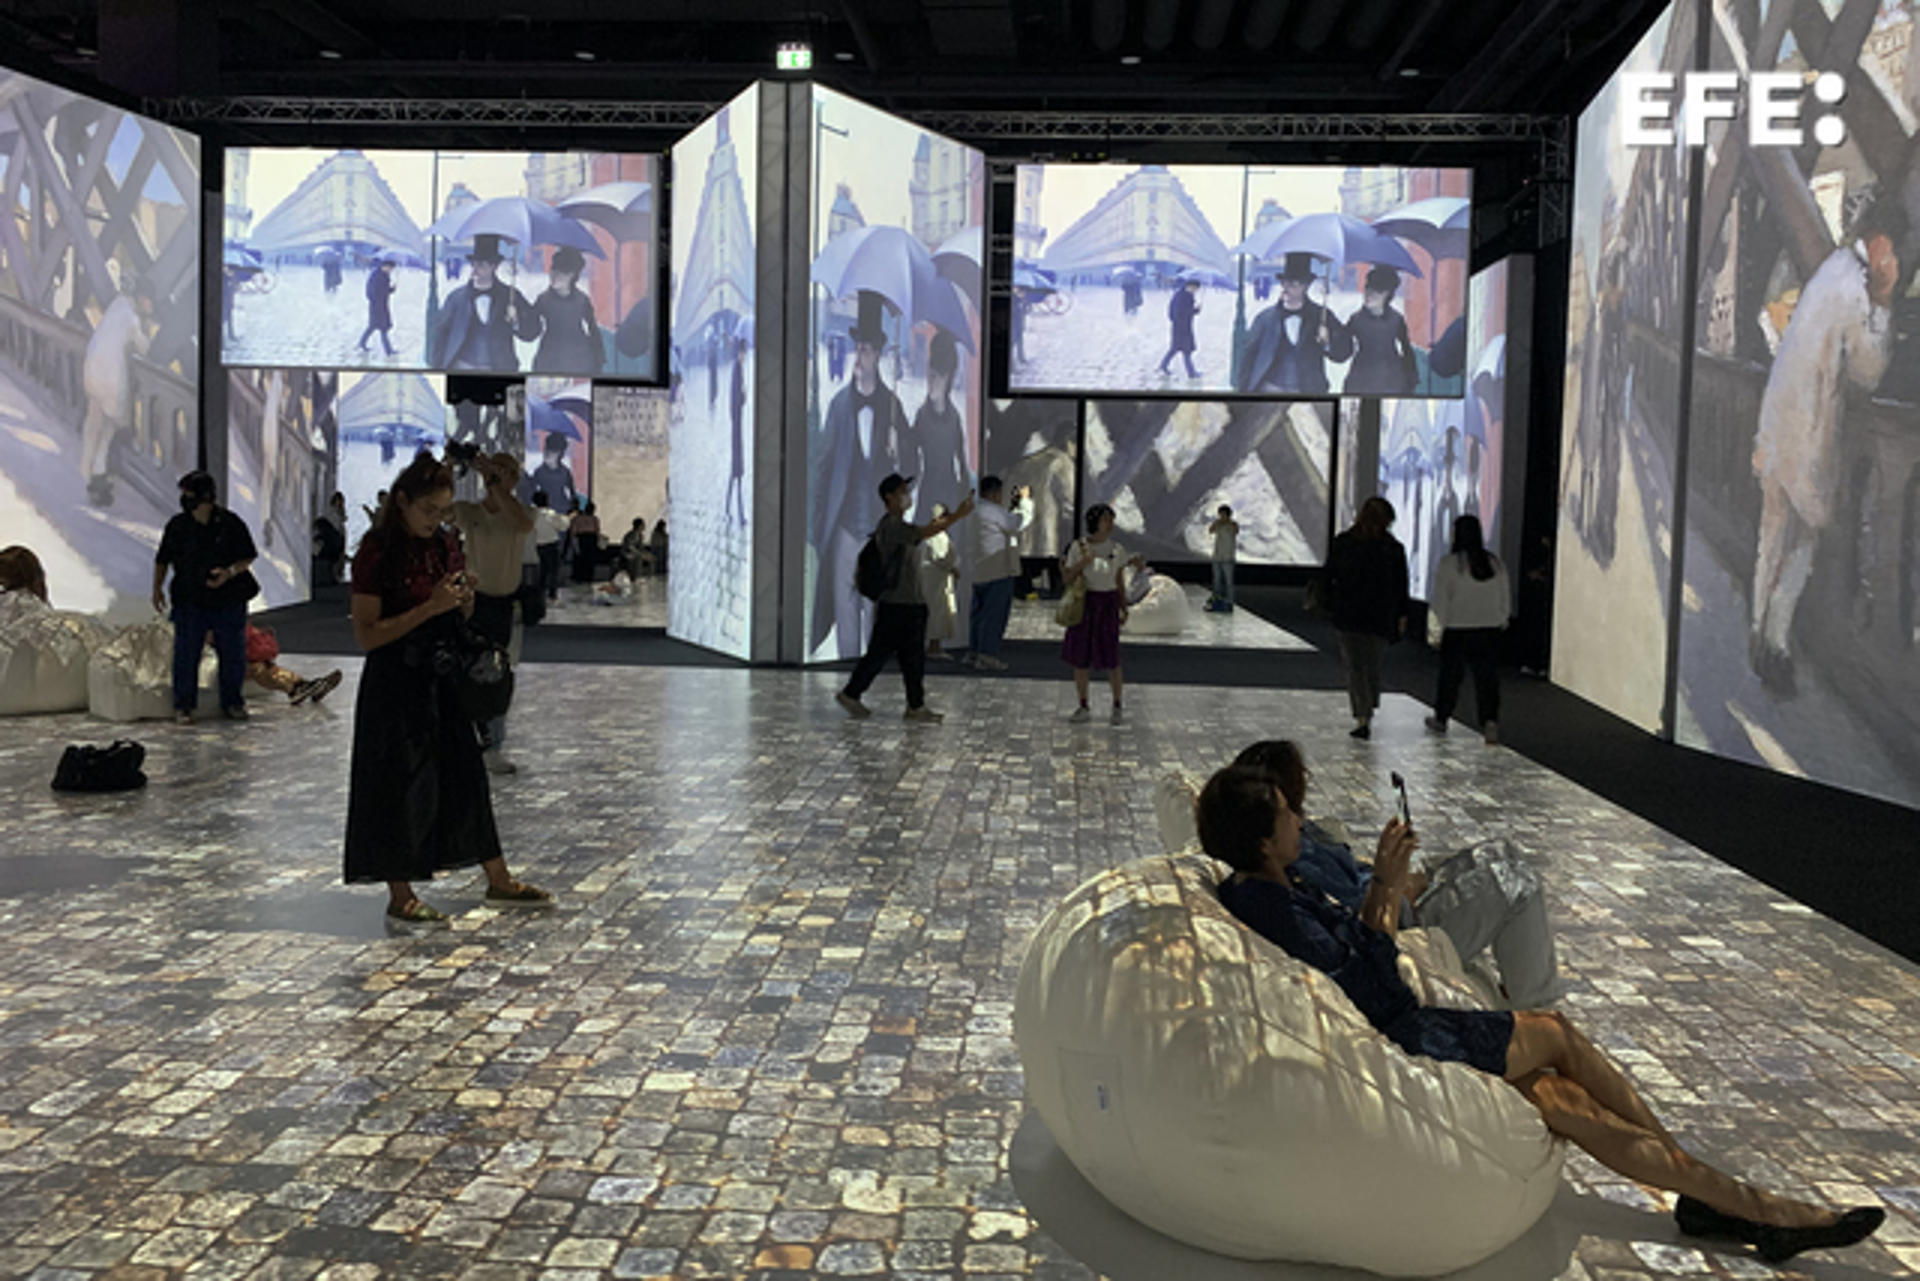 Picture of the "Attraction Hall" room at the IconSiam shopping center in Bangkok, Thailand, which hosts the inmersive exhibition "Monet and Friends Alive". EFE/ Nayara Batschke